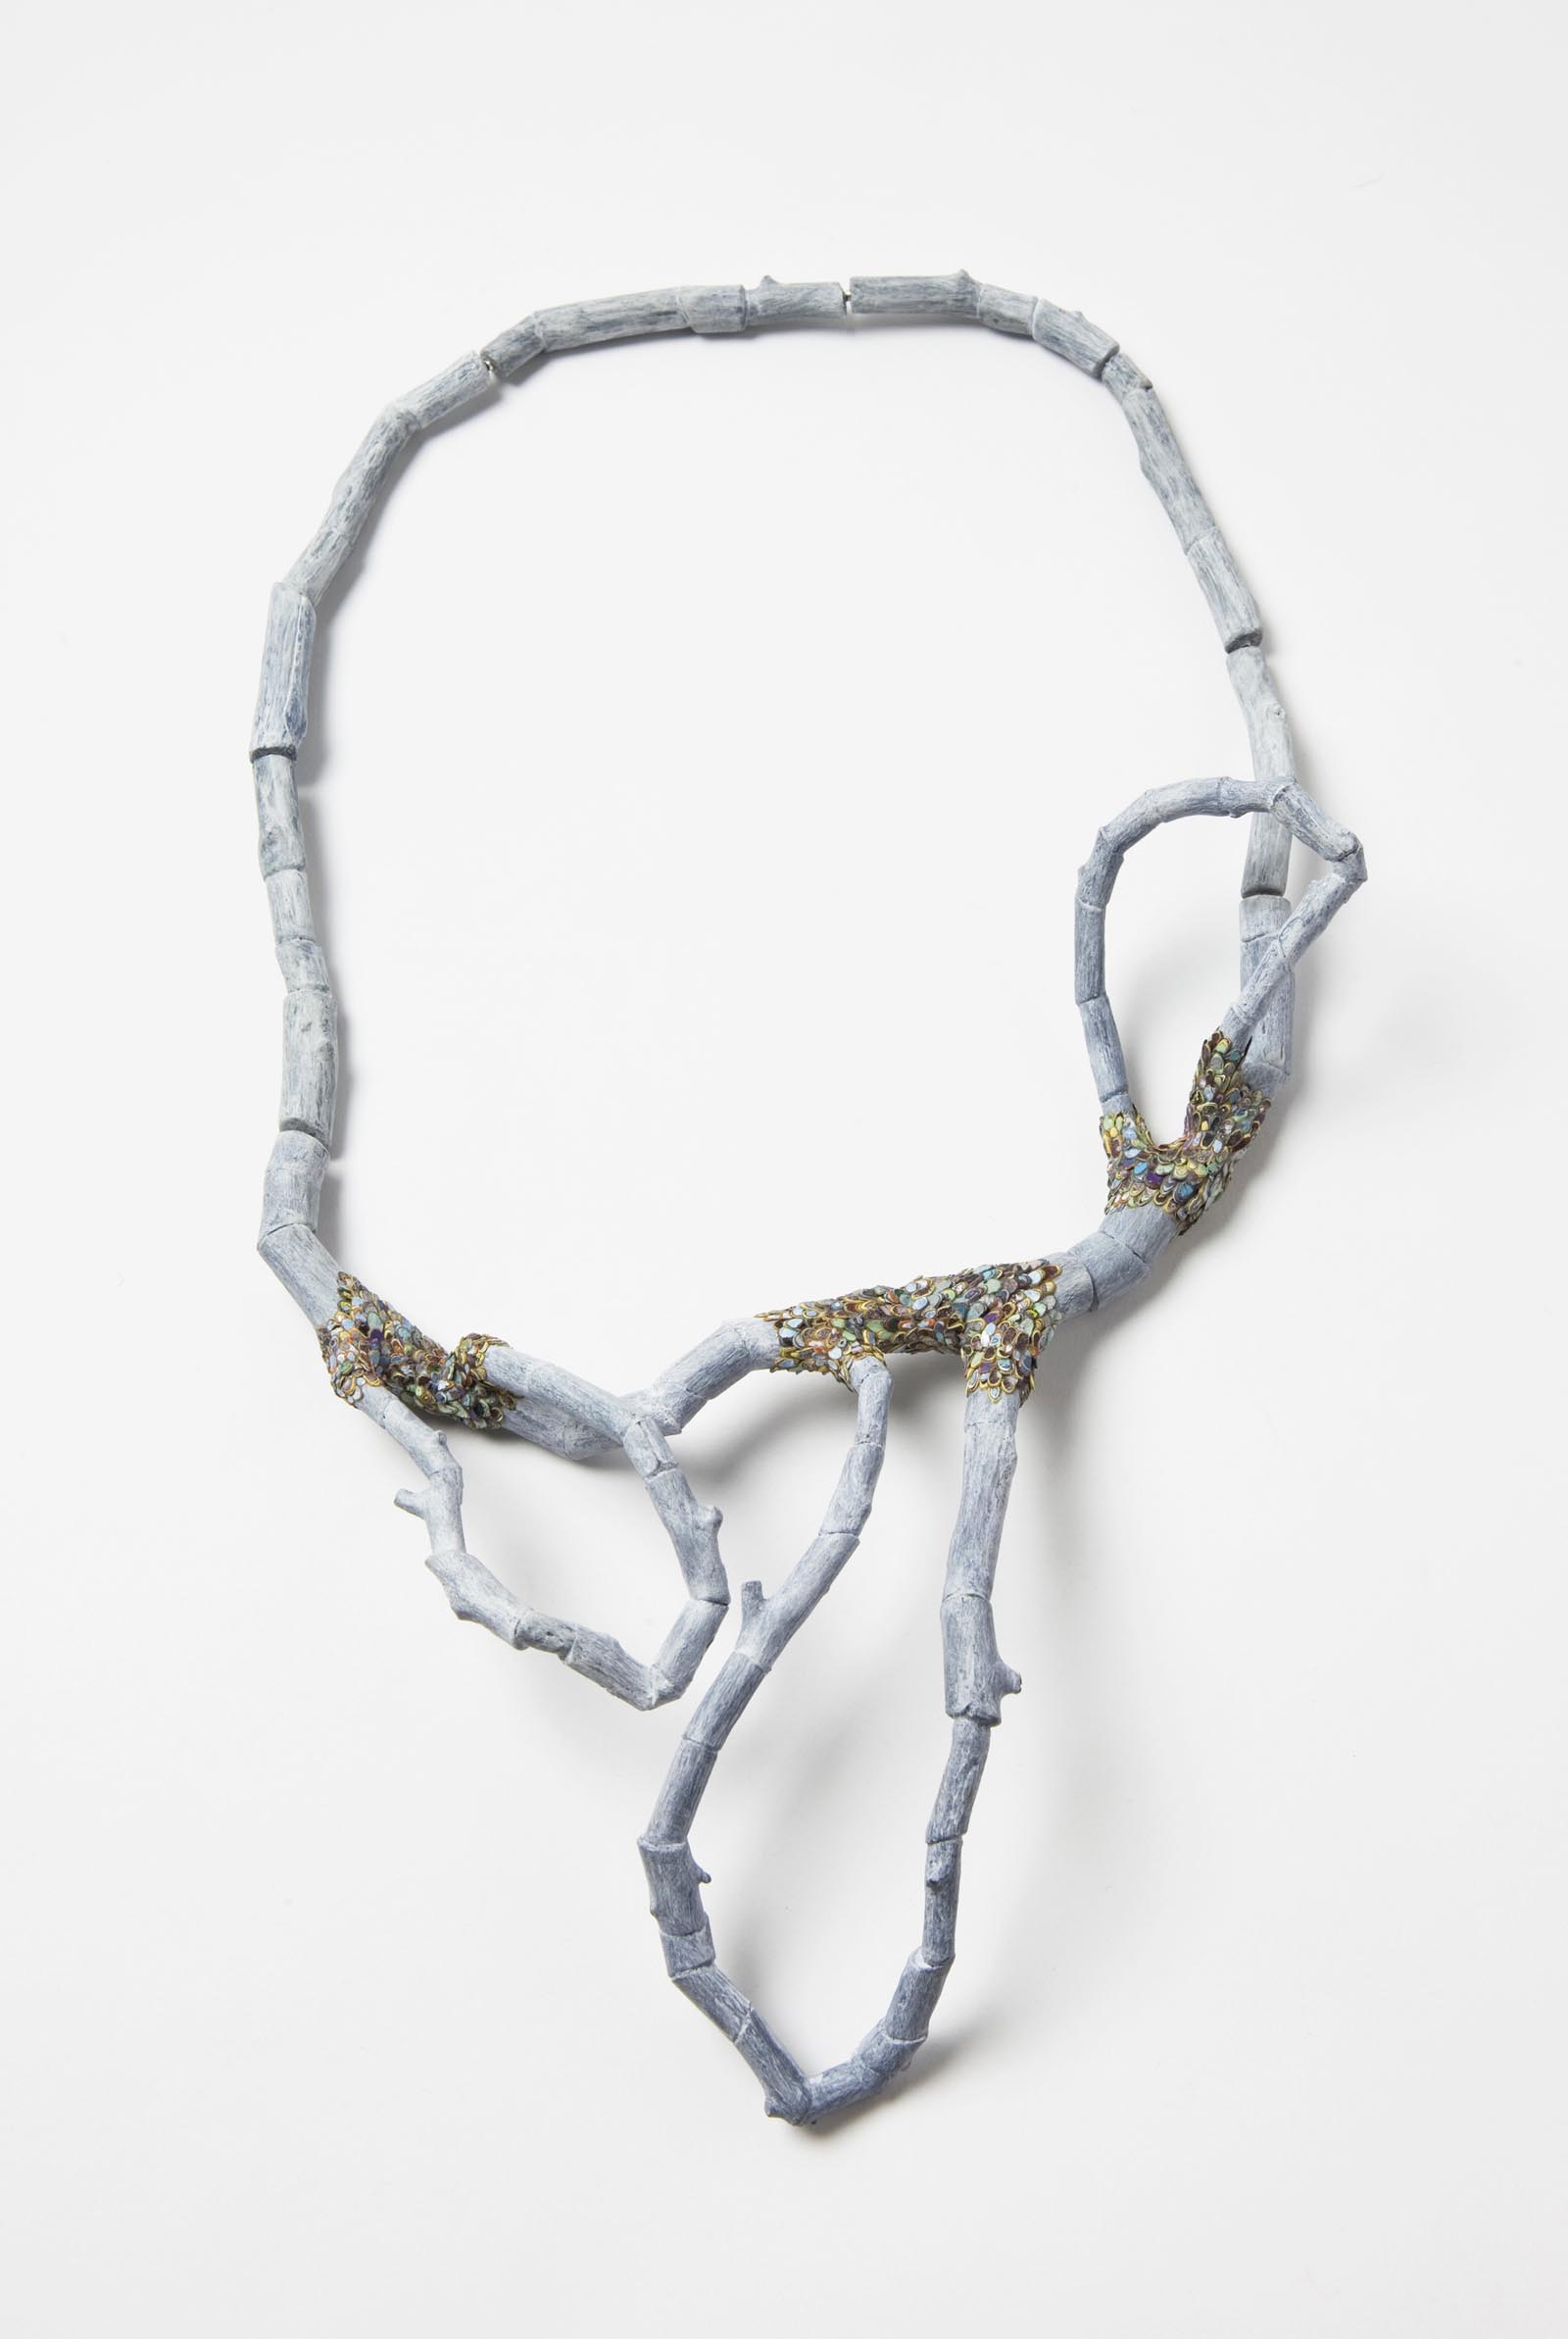 "Confused Branches 1" I Necklace, 2014 I Wood, graffiti, silver, steel wire, paint I Photo: Mirei Takeuchi